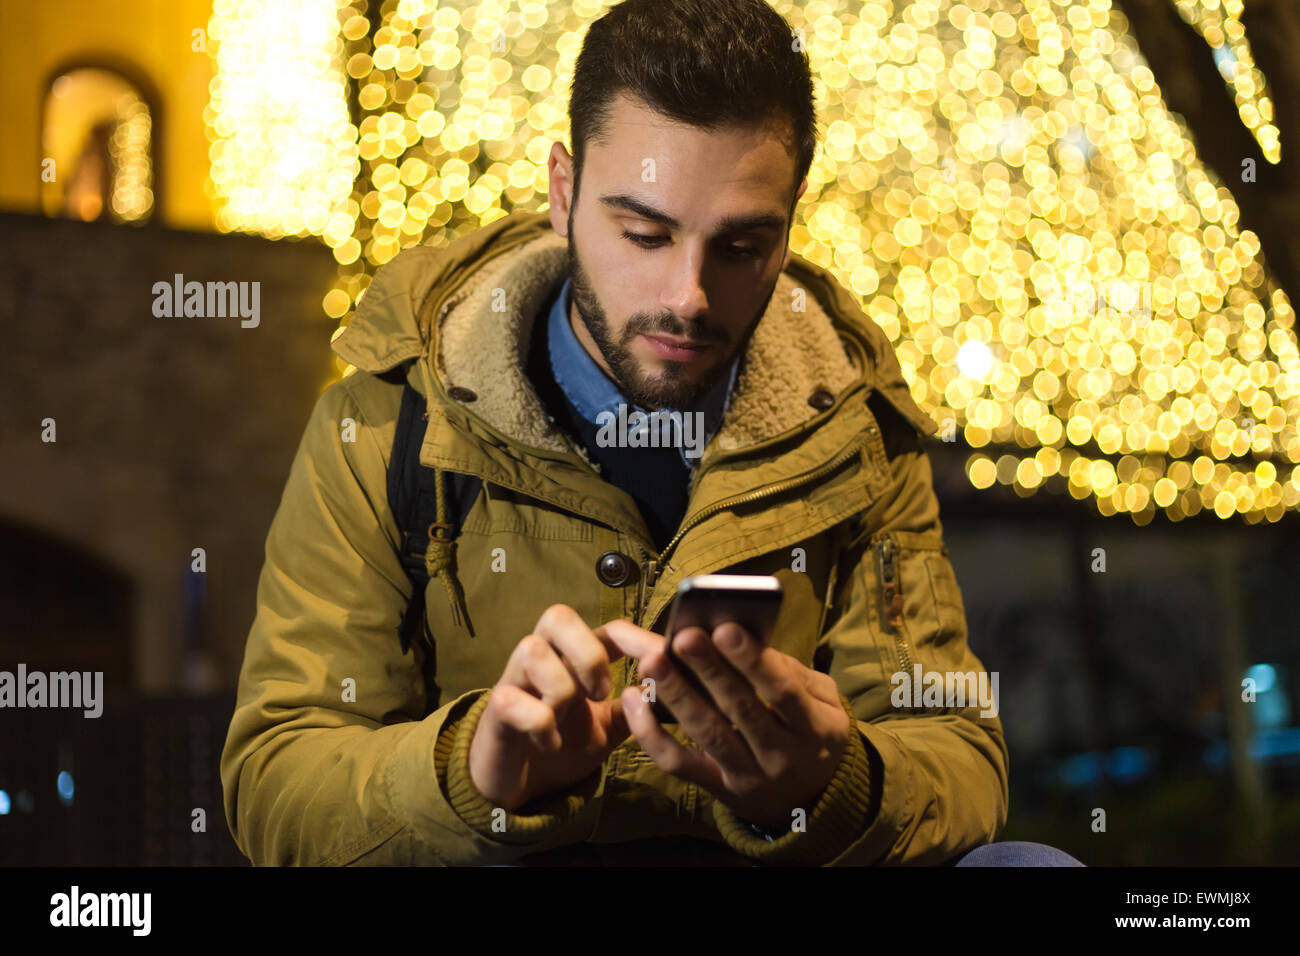 Outdoor portrait of young man using his mobile phone at night. Stock Photo